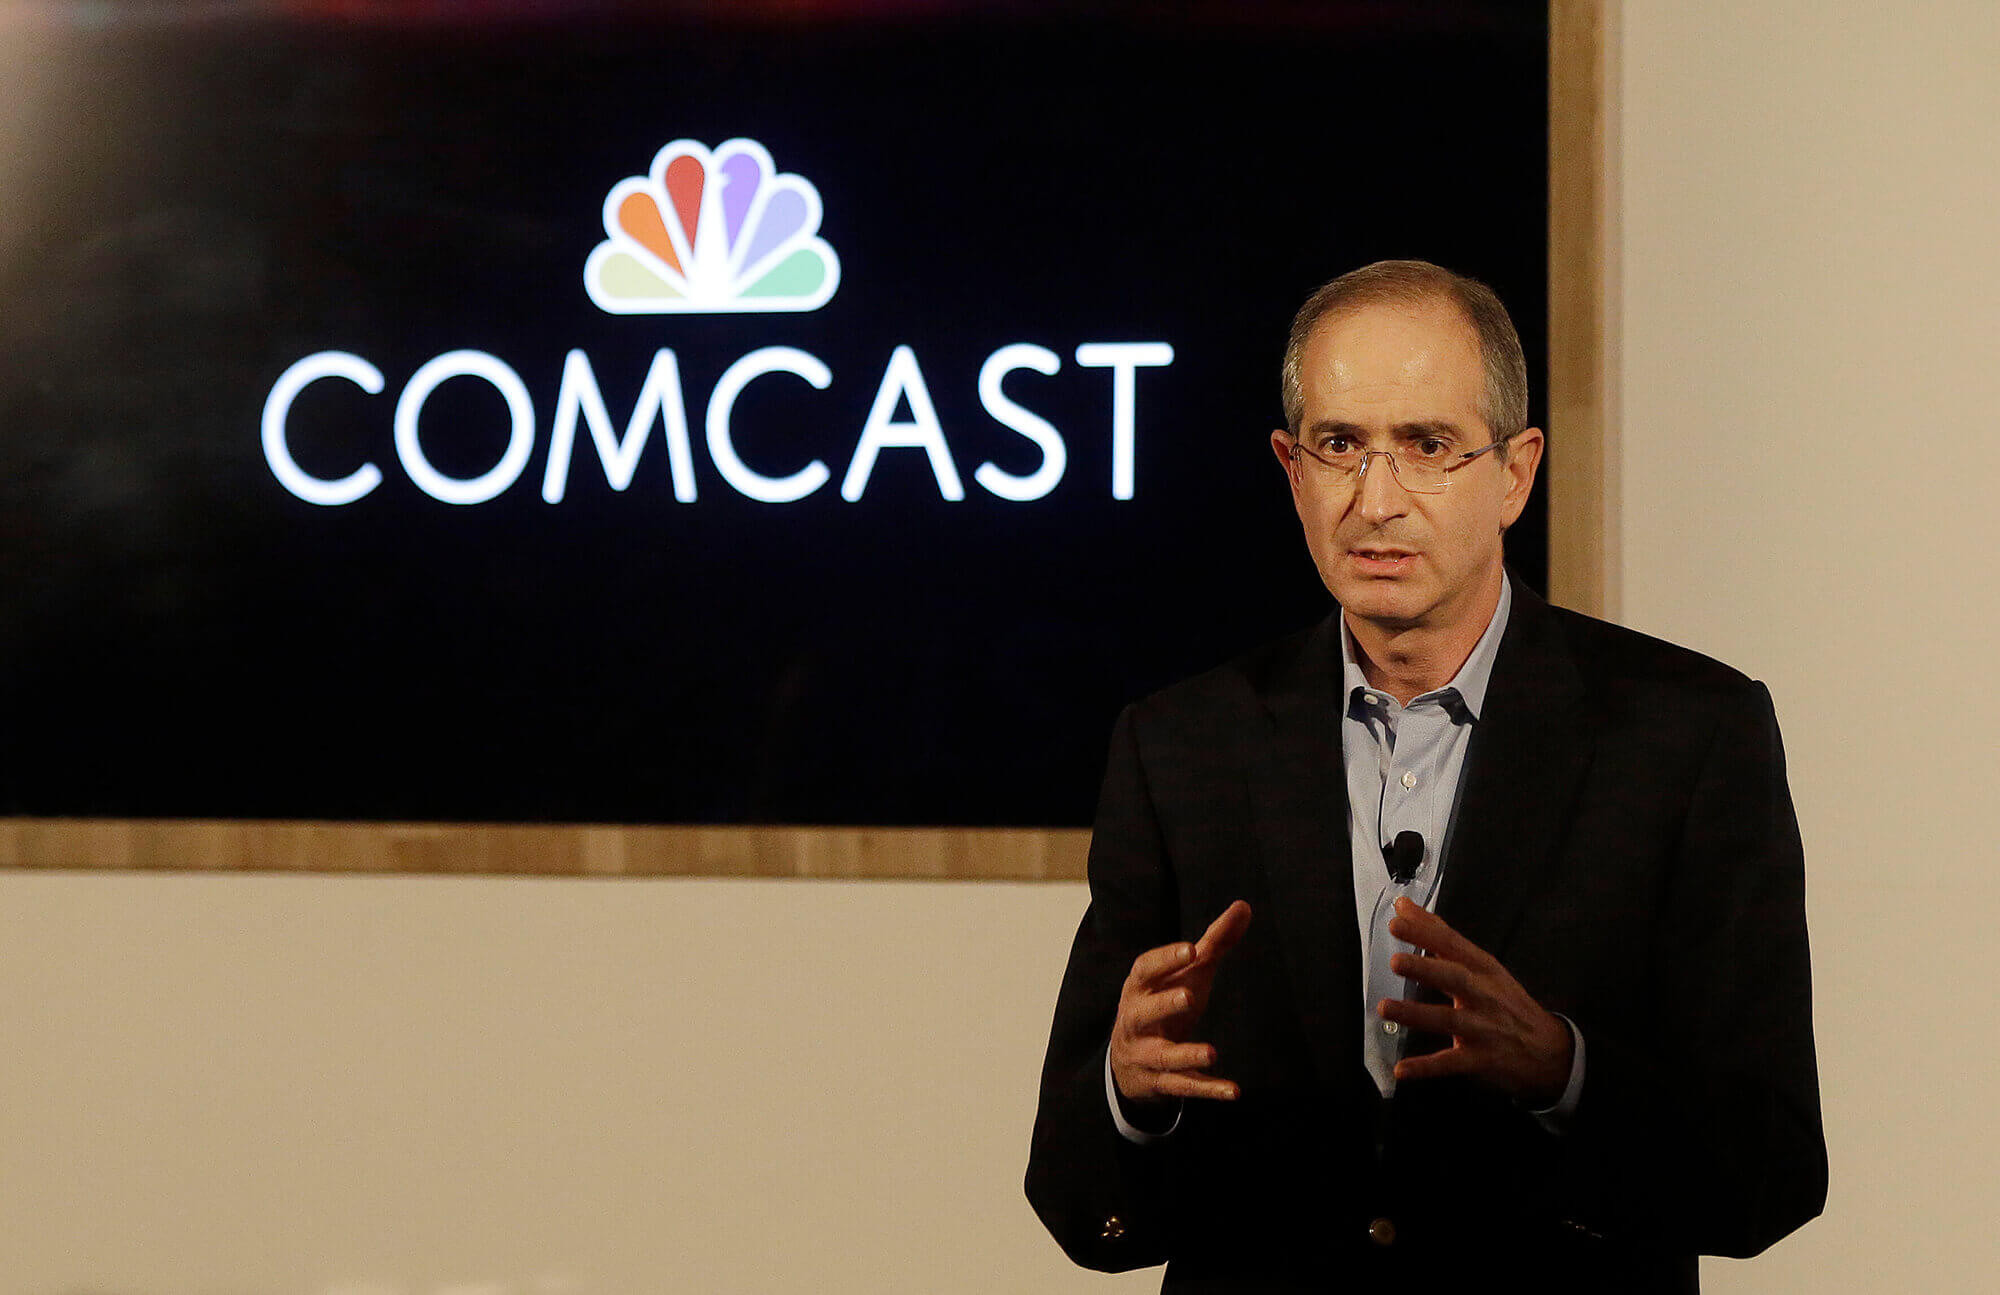 Image of CEO with Comcast logo